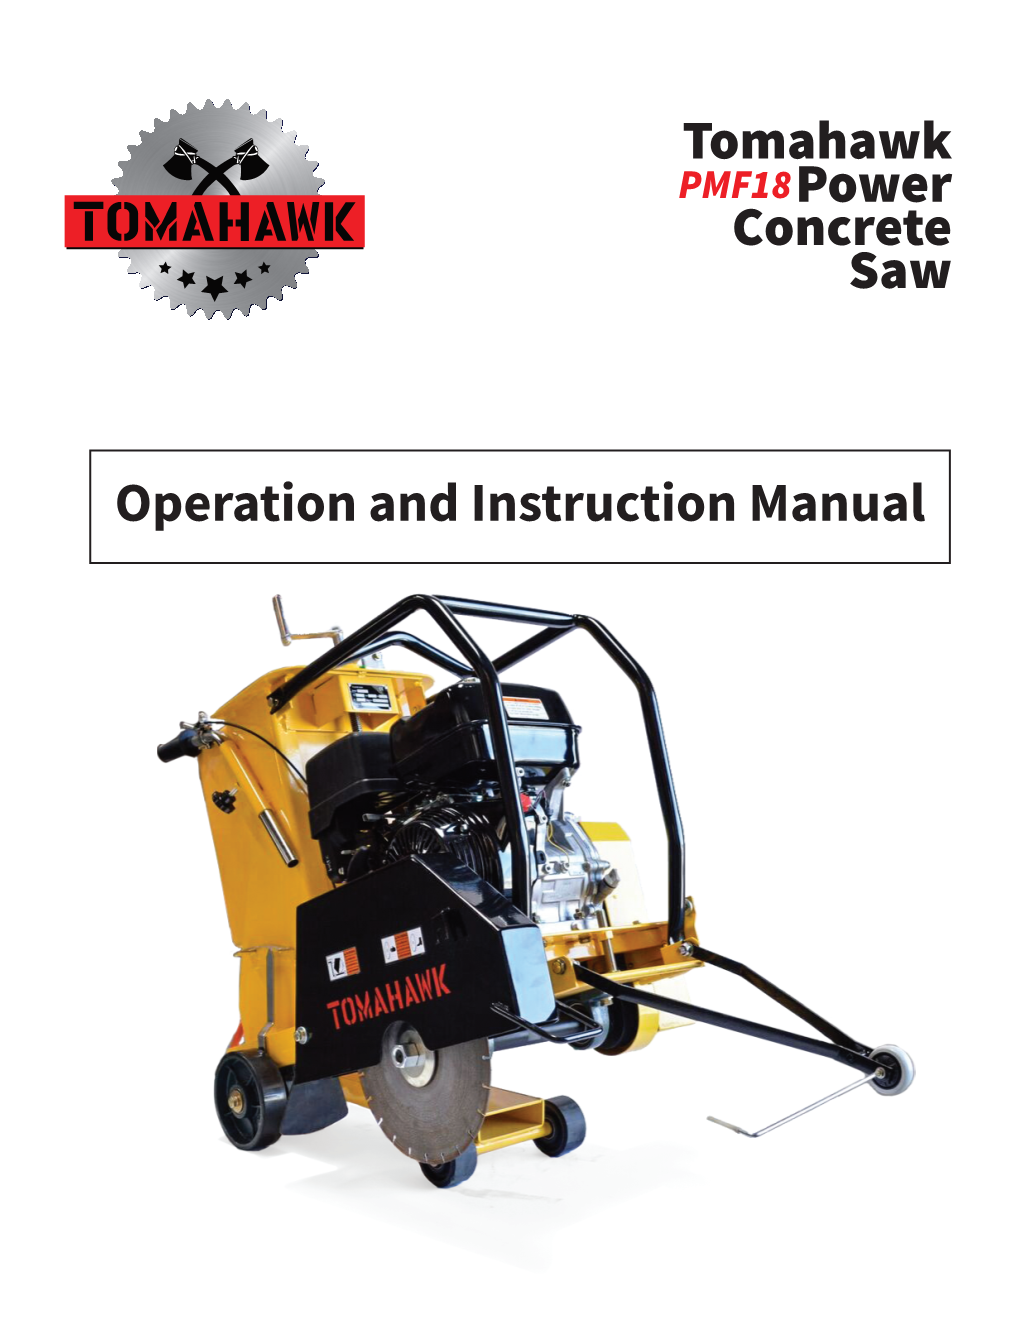 Tomahawk Power Concrete Saw Operation and Instruction Manual